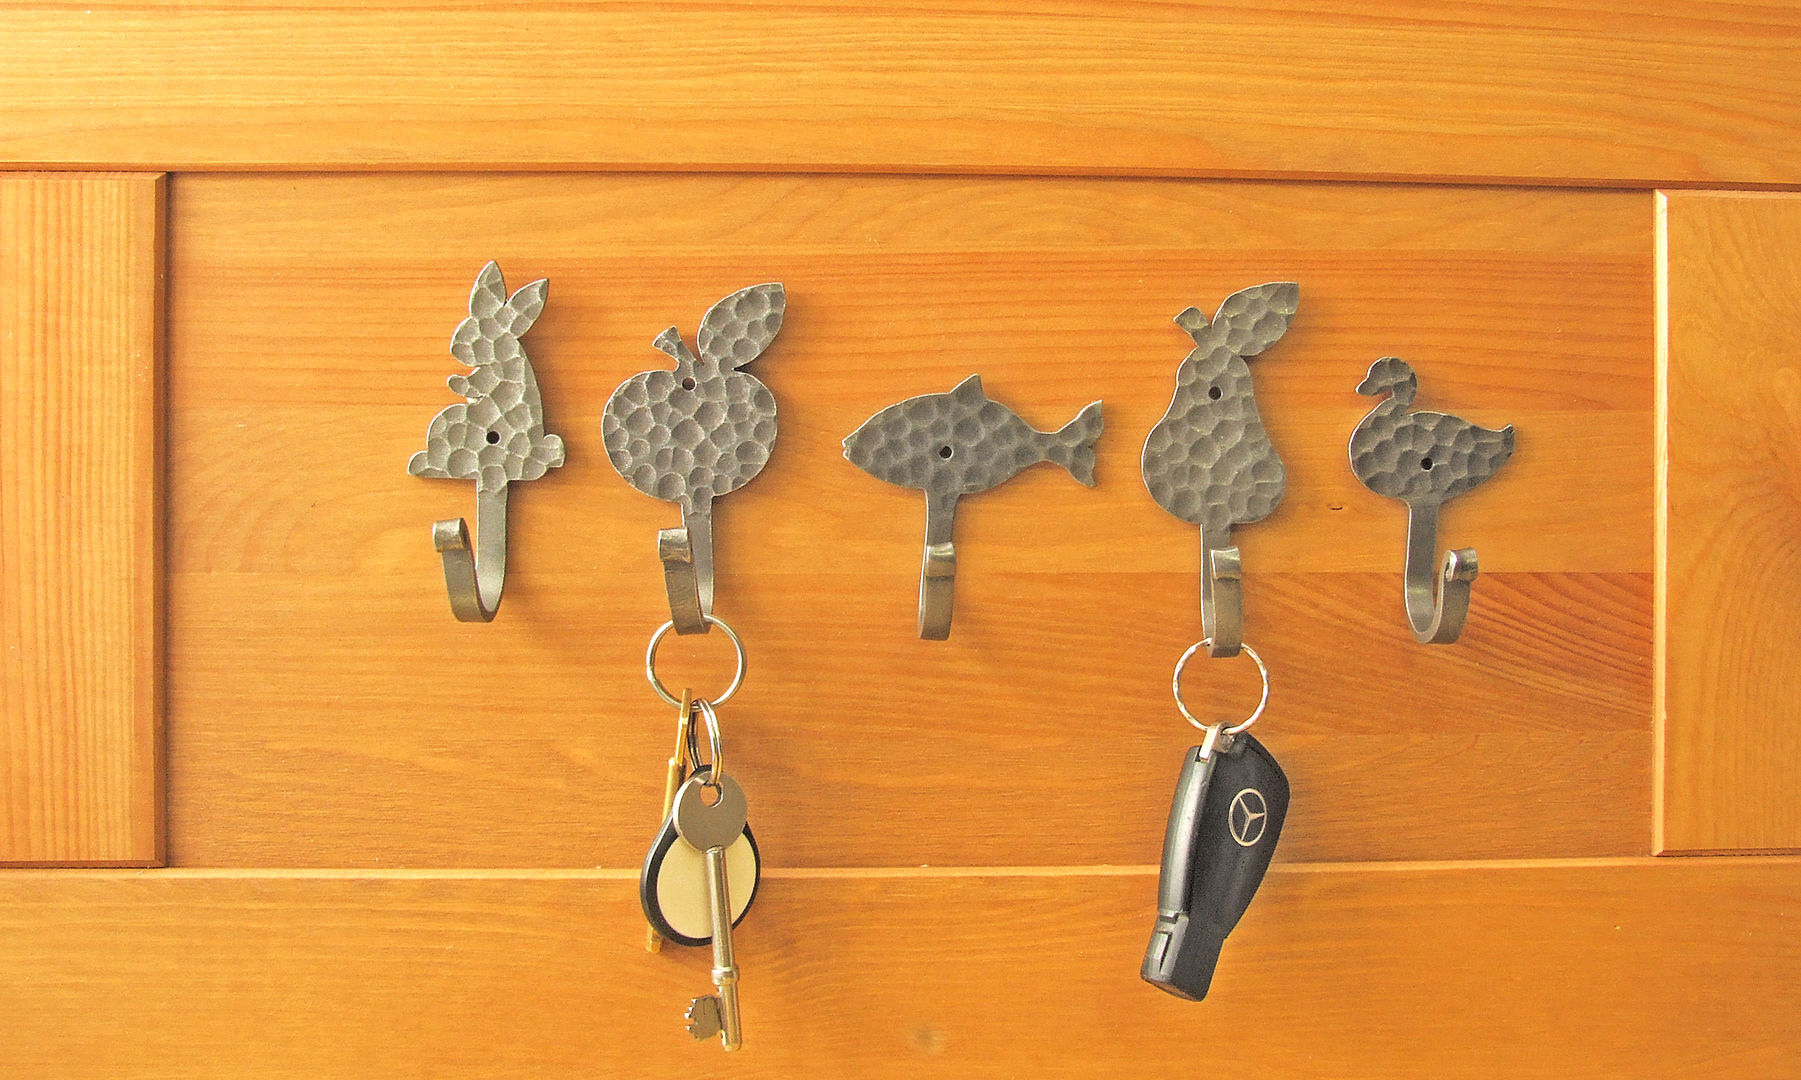 Hooks for keys or cups or for what ever you want... Clayton Munroe Puertas eclécticas Hierro/Acero Pomos y accesorios